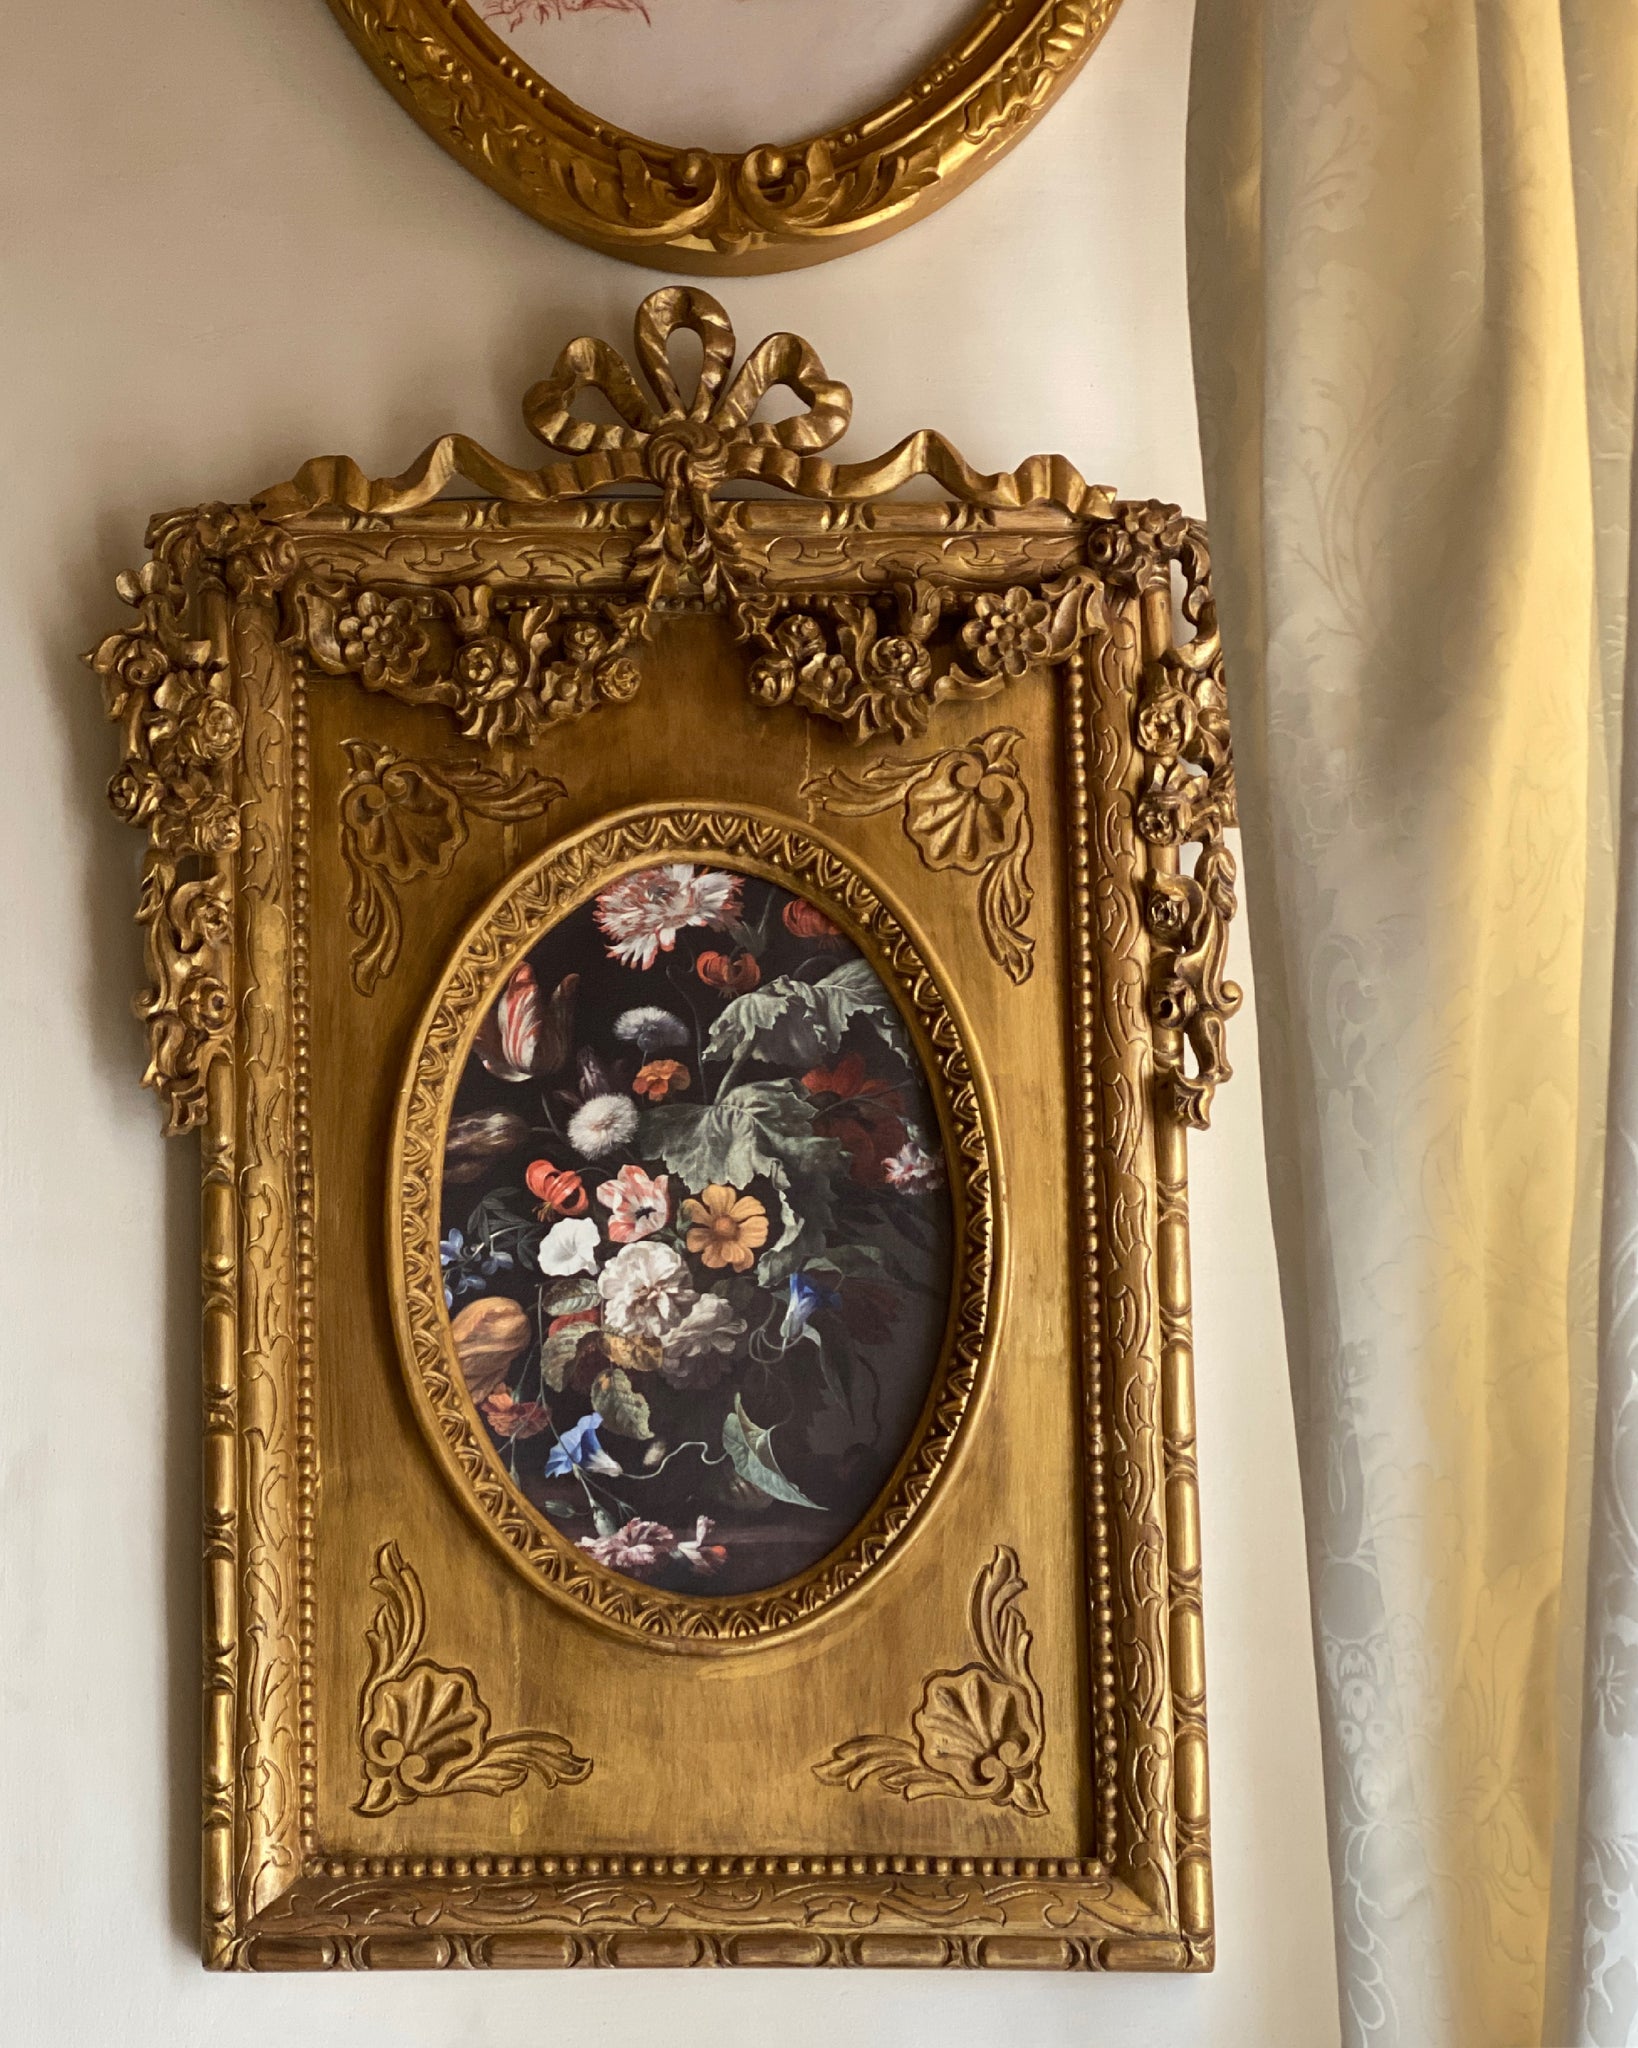 Late Louis XVI frame with wreathes from the Unfurling